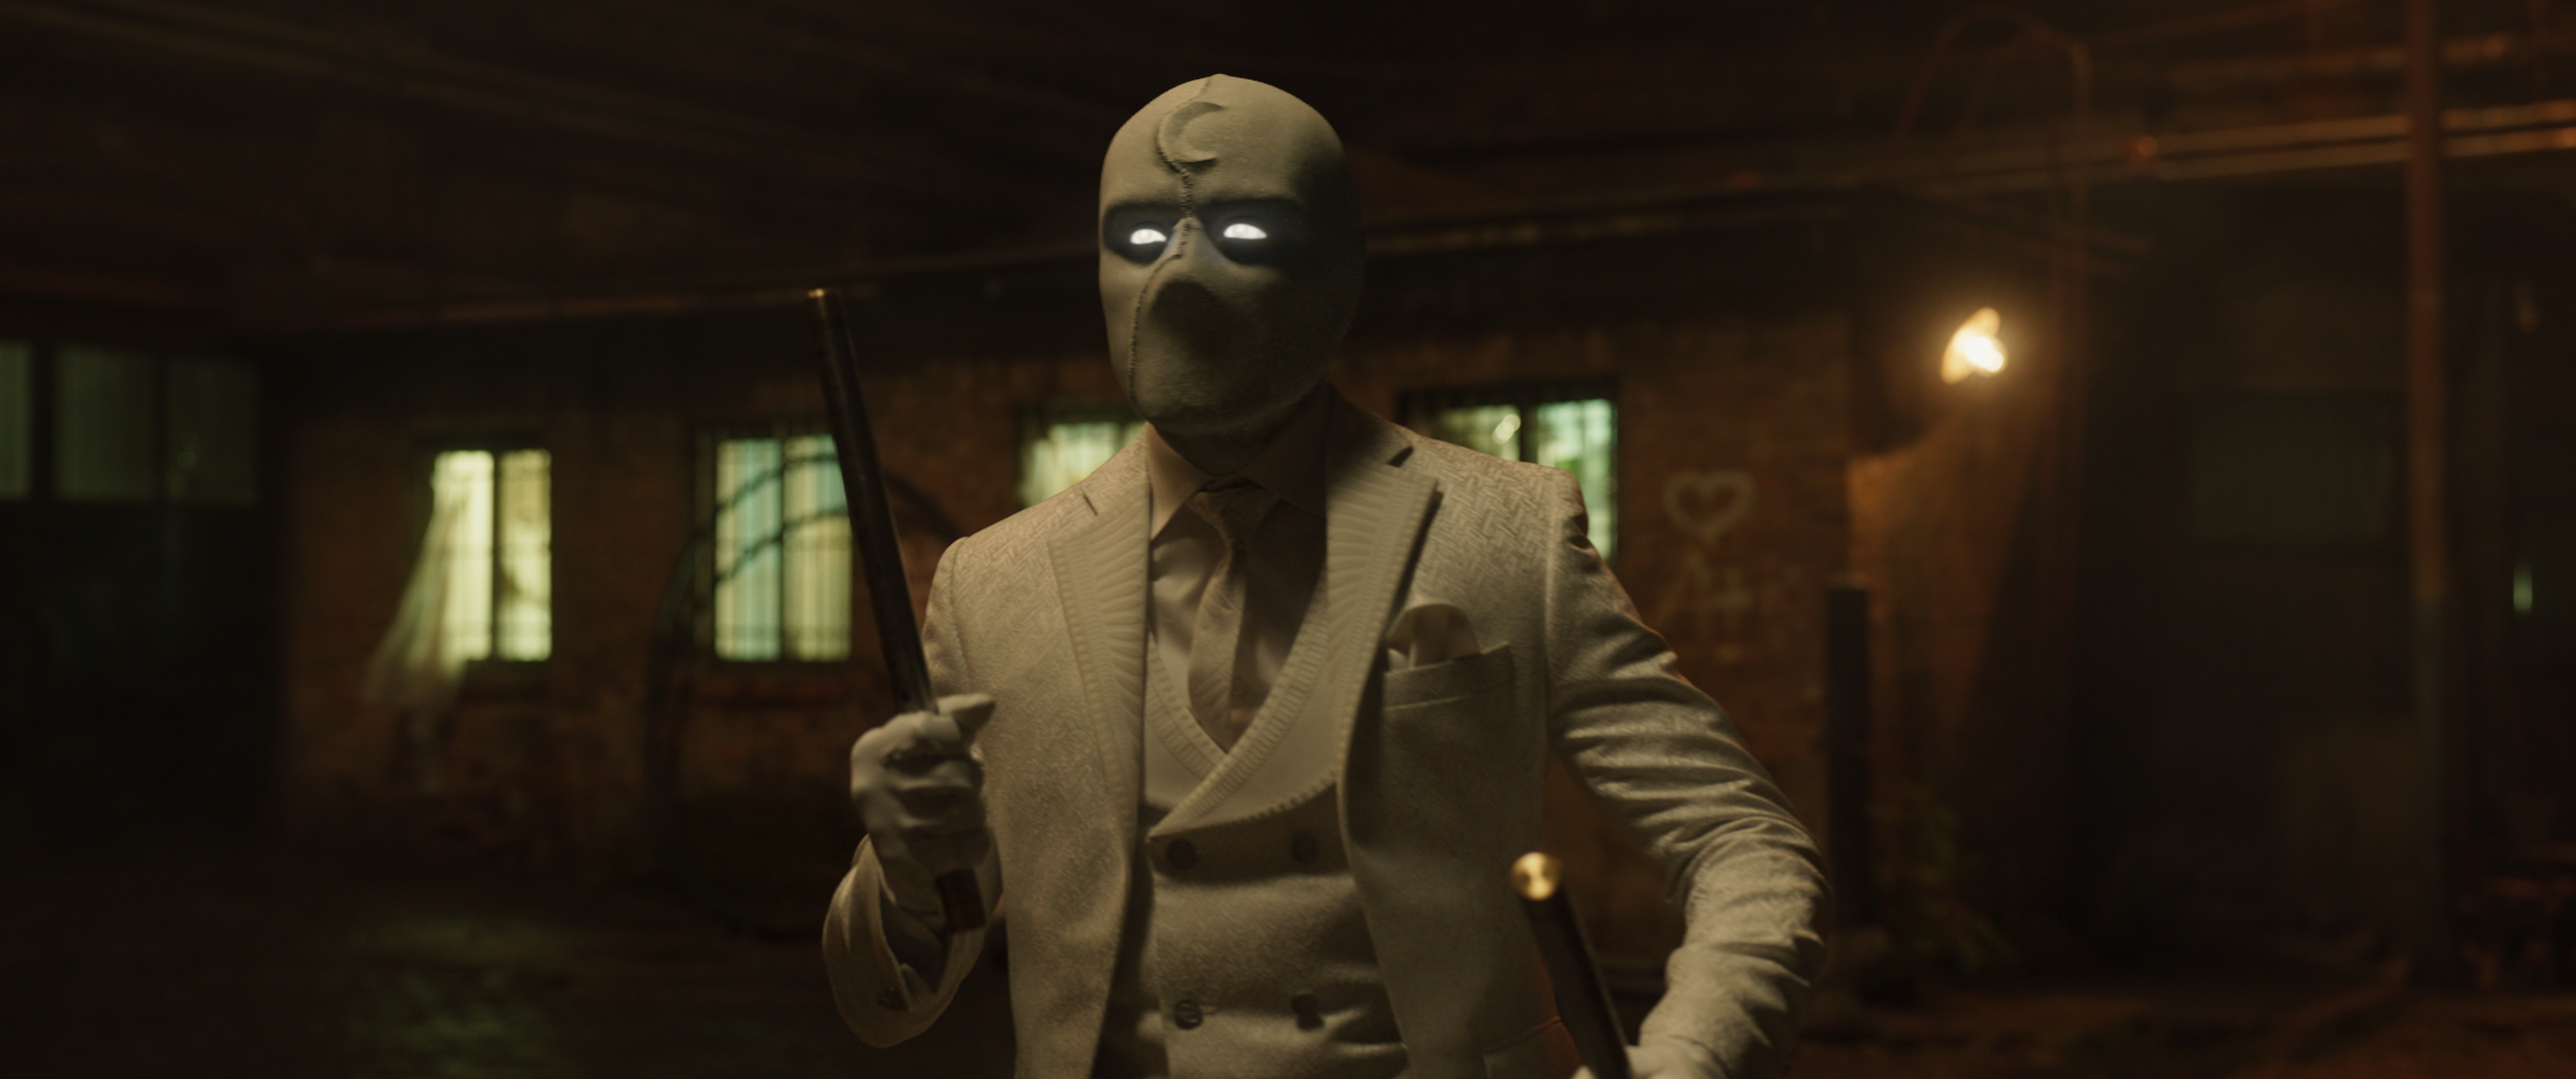 Will there be a Moon Knight season 2? - Quora